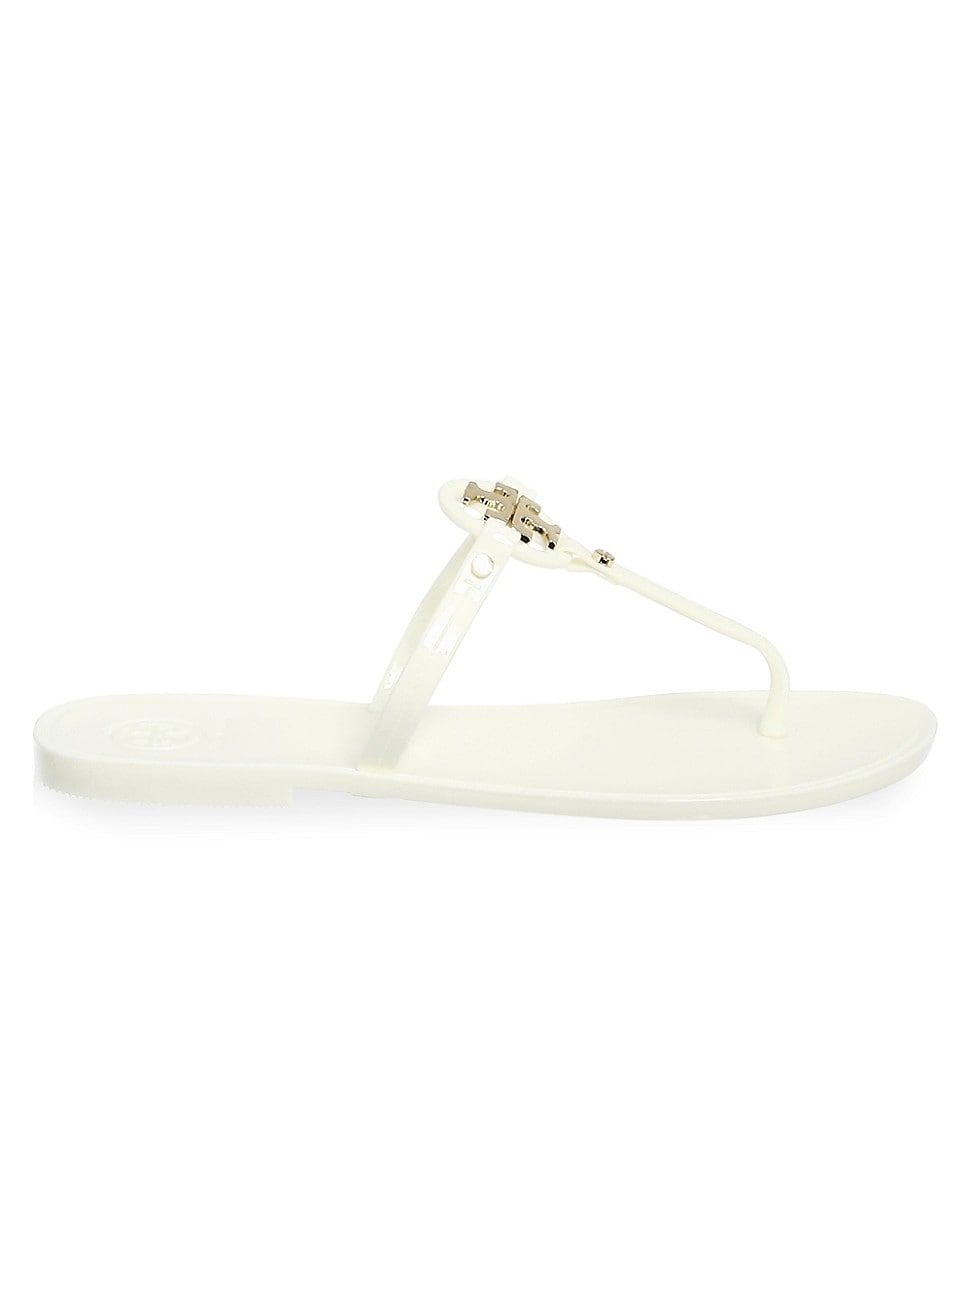 Tory Burch Women's Mini Miller Jelly Thong Sandals - Ivory - Size 9 | Saks Fifth Avenue